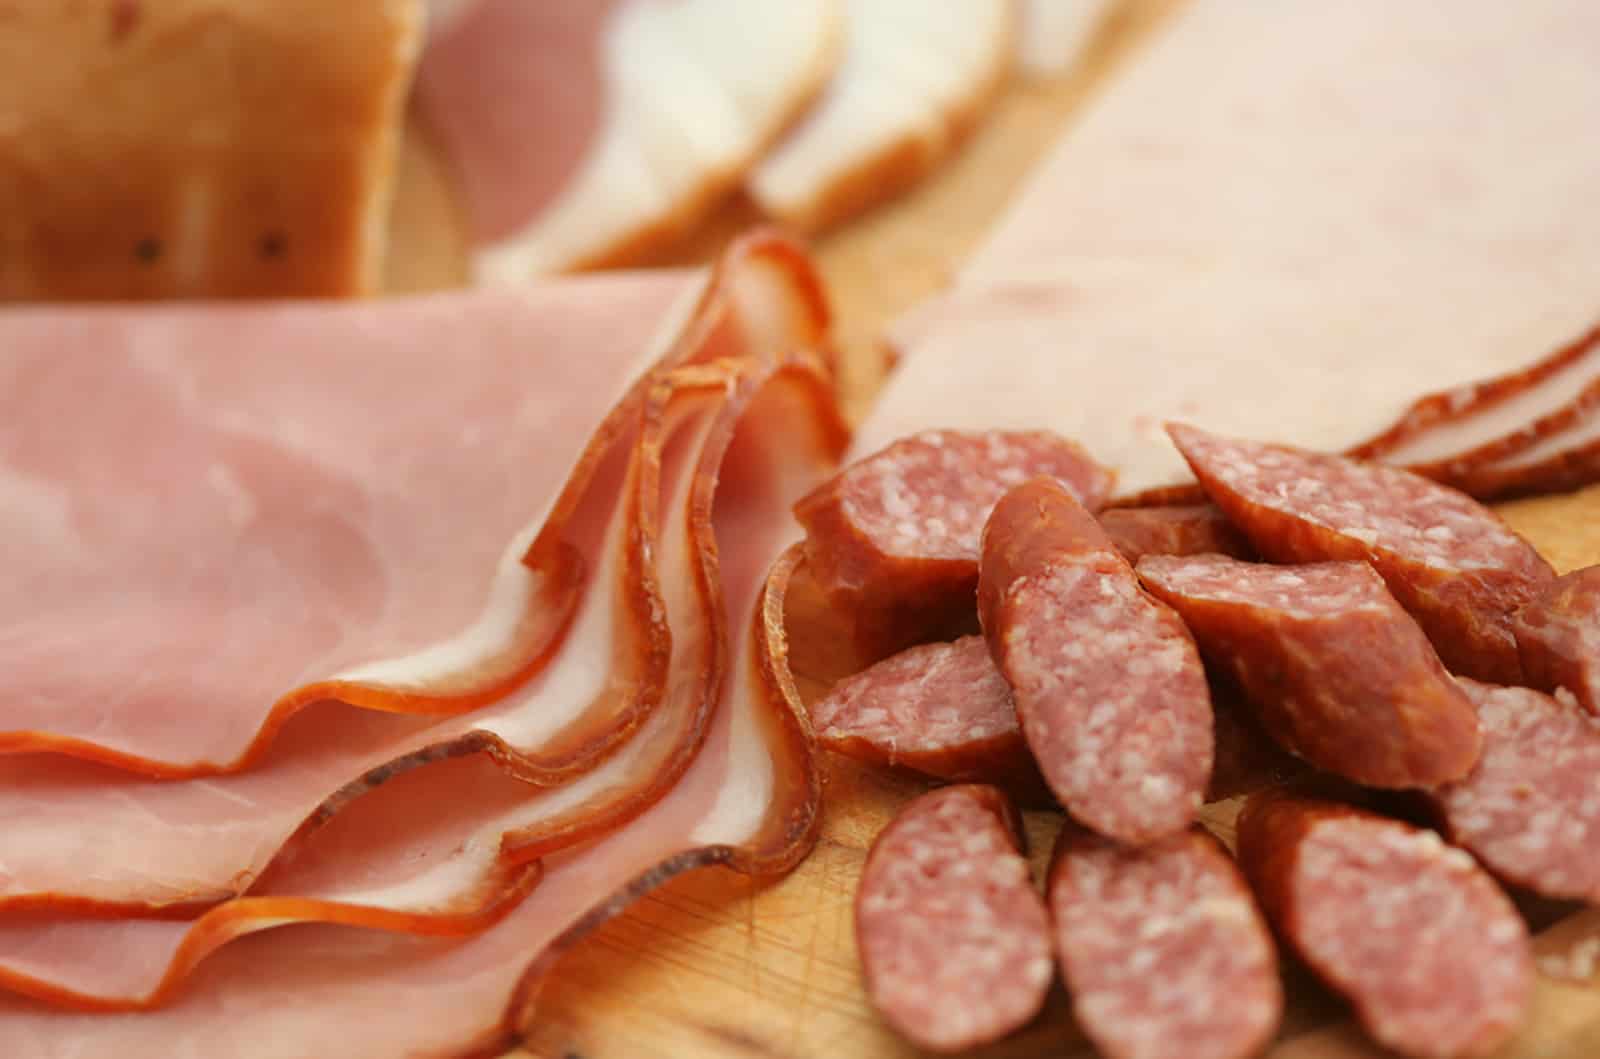 processed meat products on the table